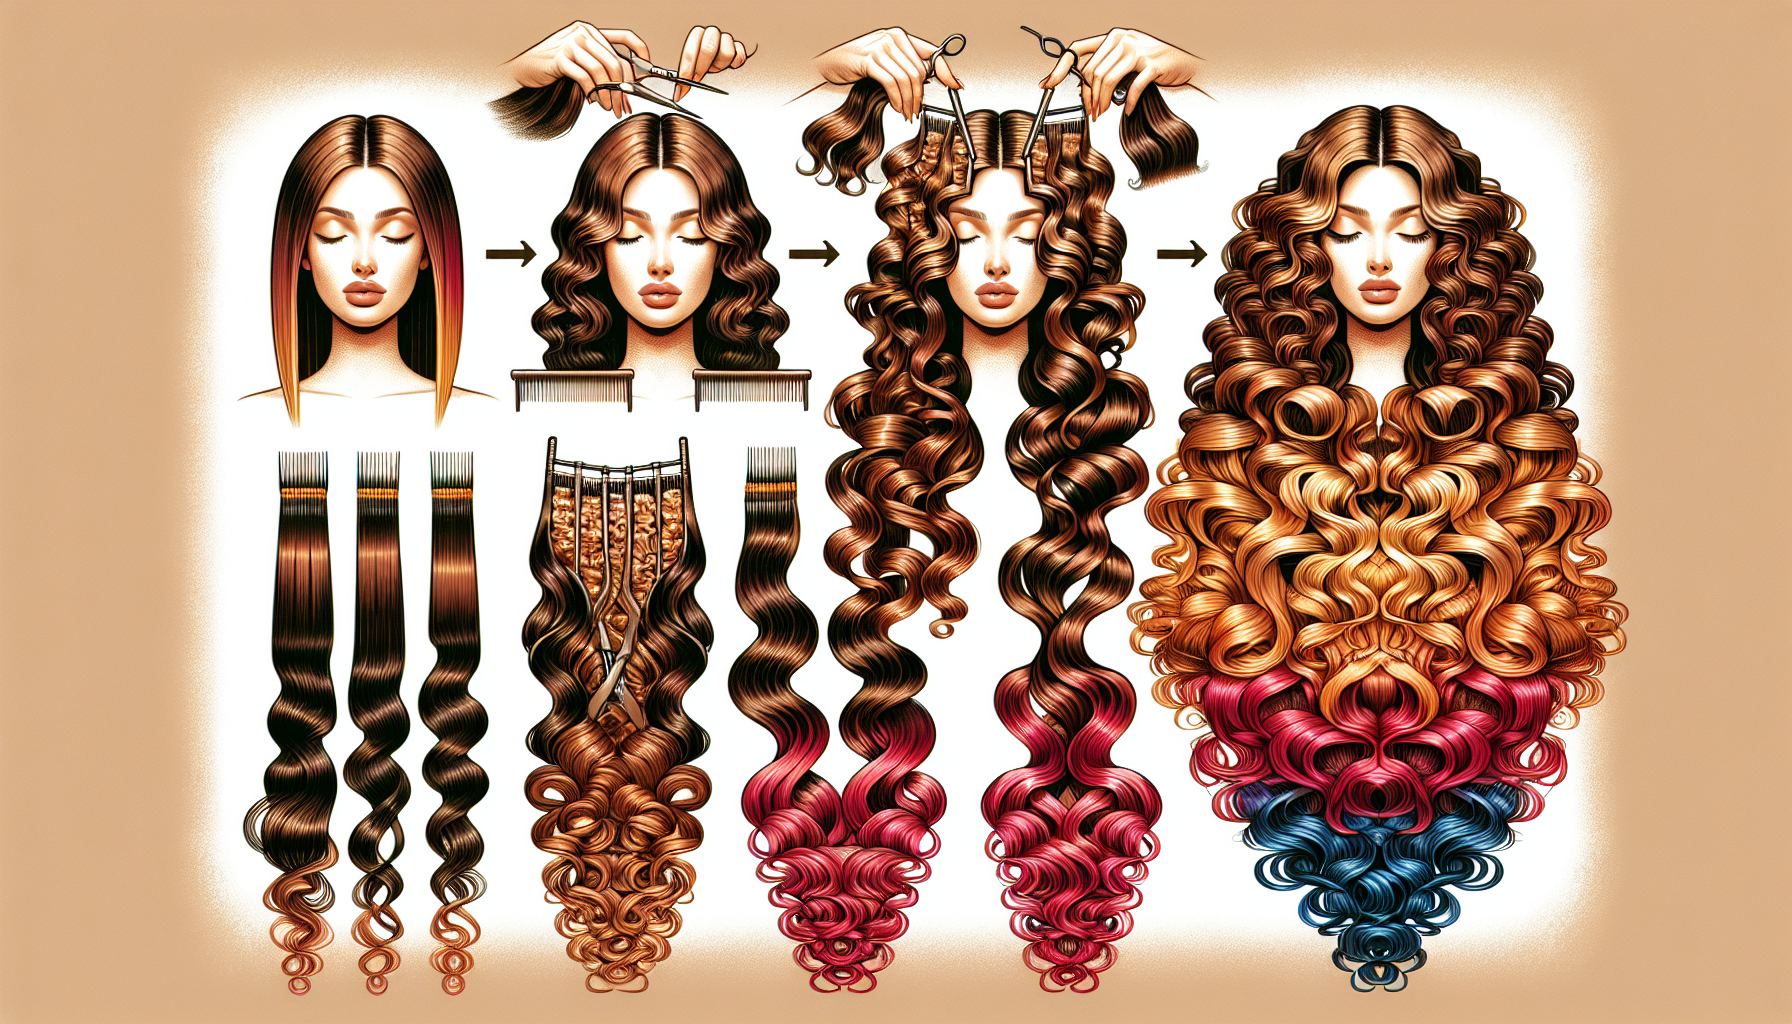 Illustration of customizing curly extensions through coloring and highlights